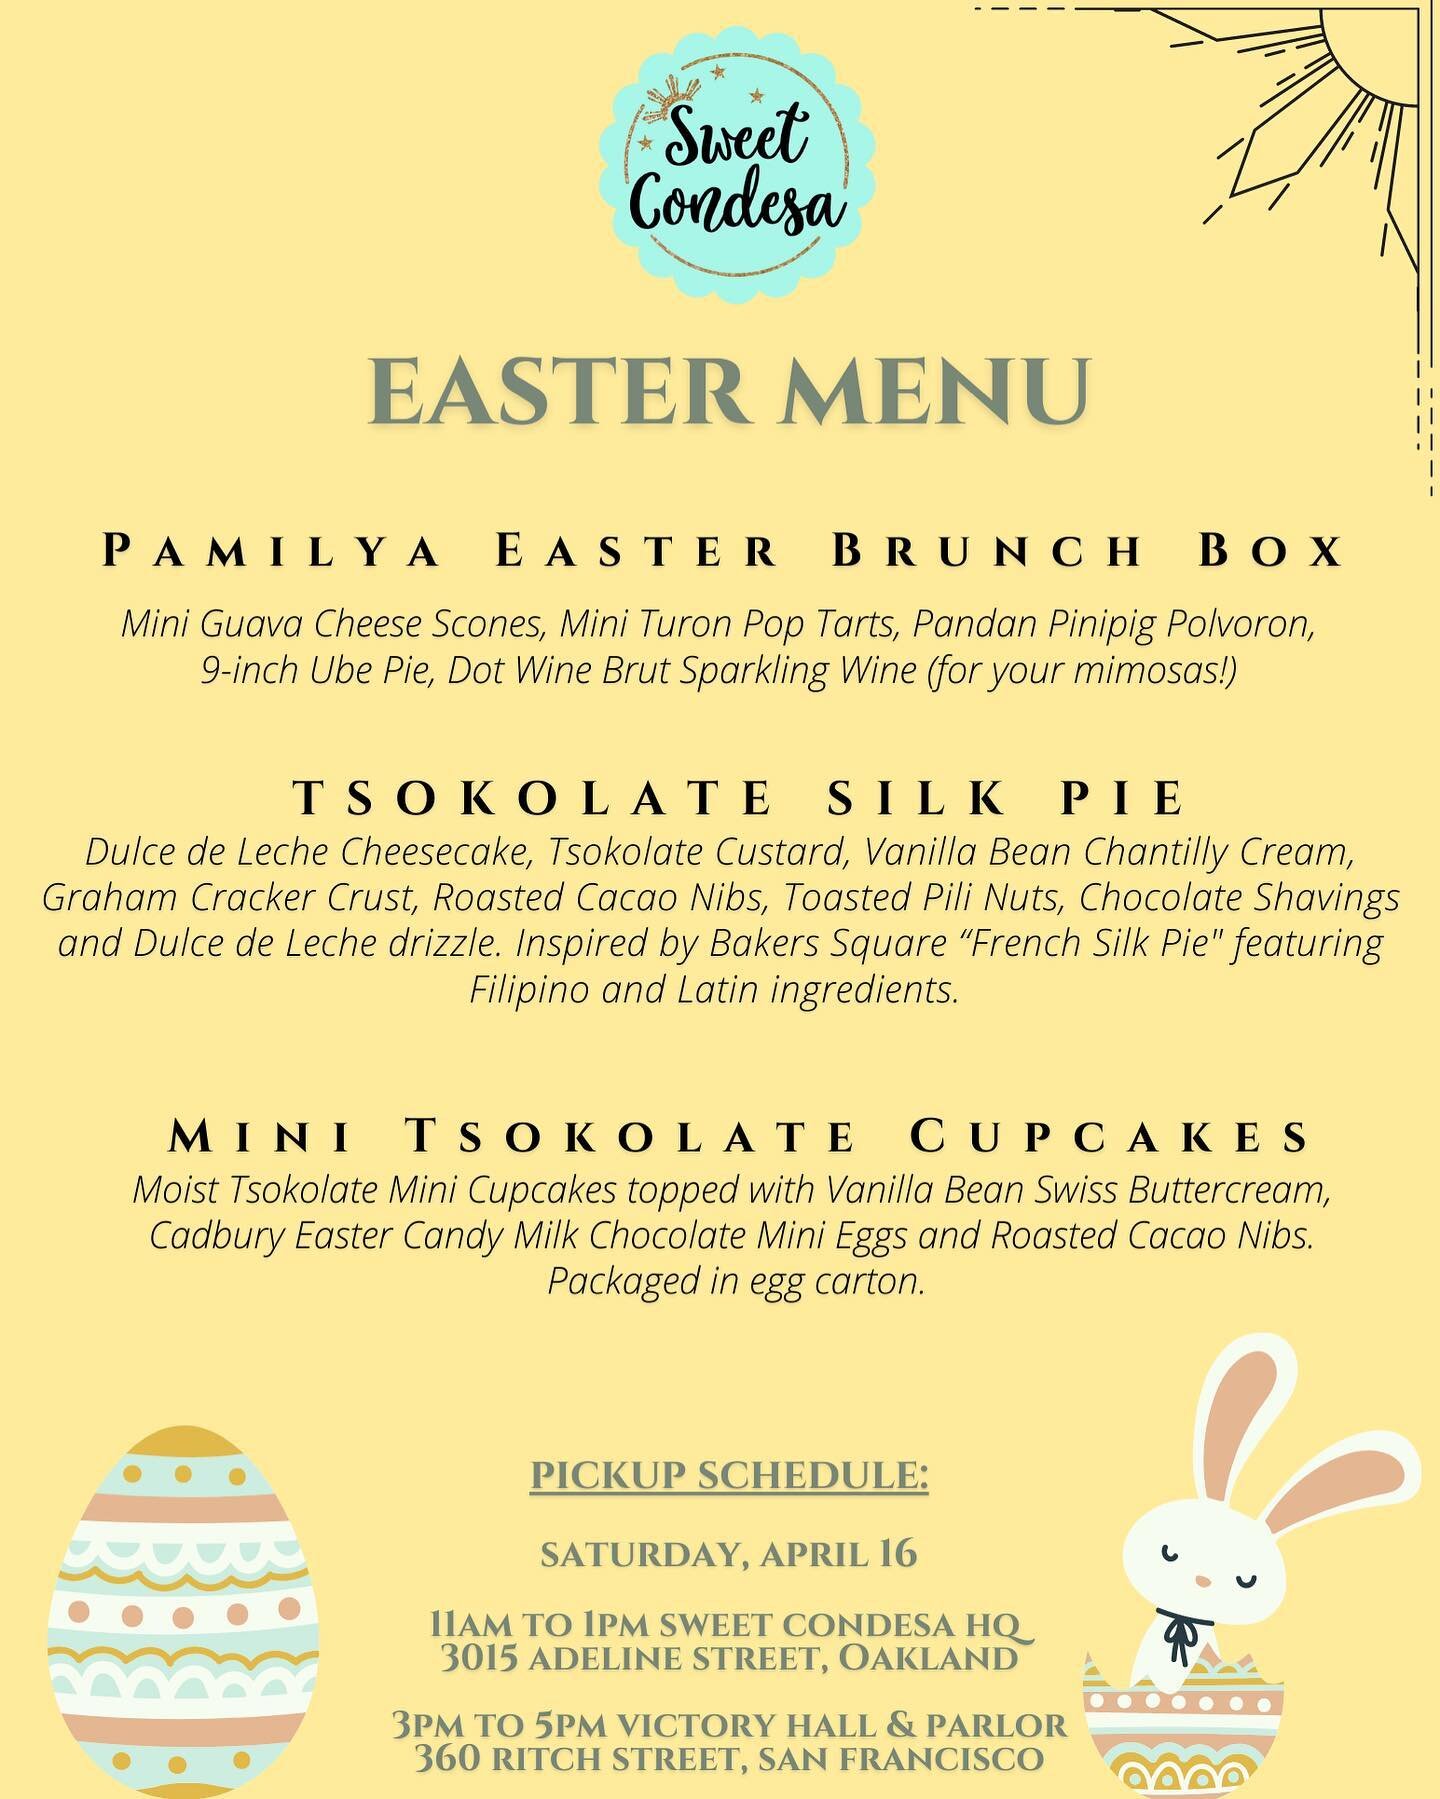 Just like that&hellip;it&rsquo;s April already! 🌸

Well, here is our Easter offerings for your family celebration. We&rsquo;re excited to create another curated box, the &ldquo;Pamilya Easter Brunch Box&rdquo; featuring our popular pastries plus a b